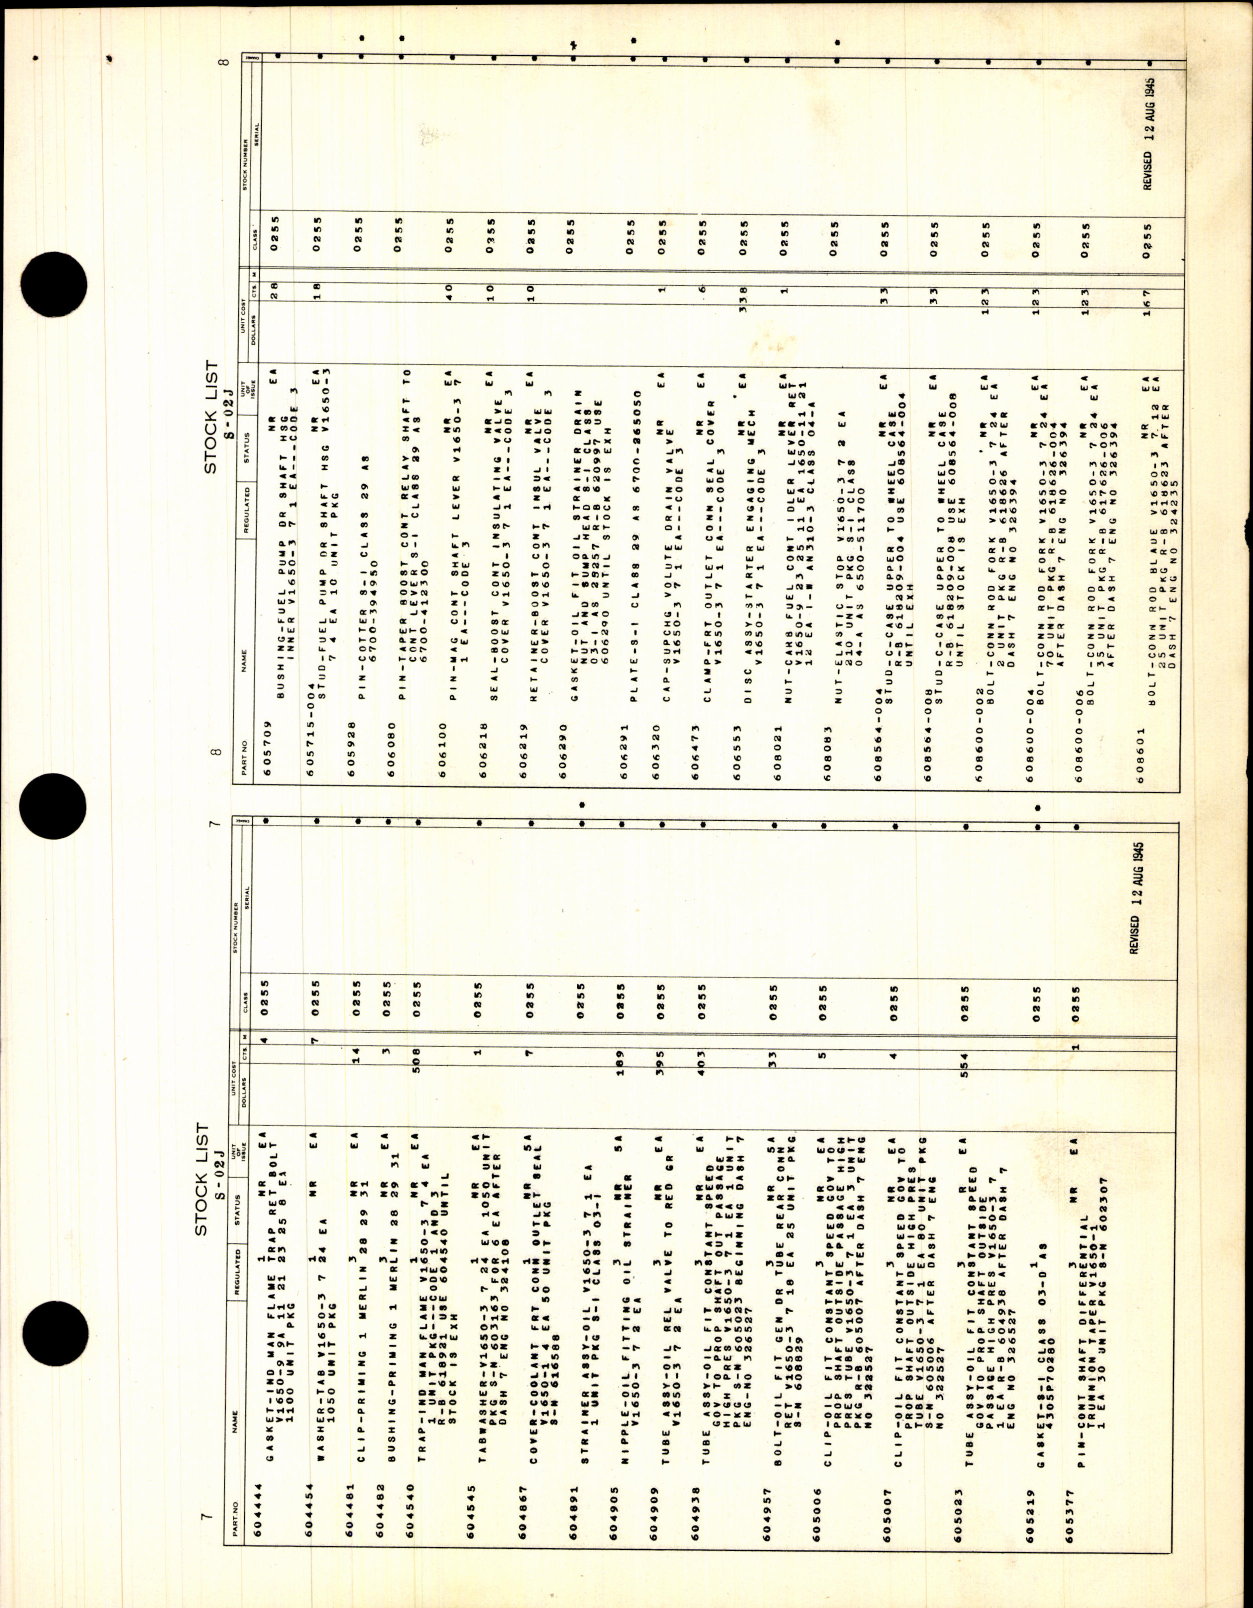 Sample page 7 from AirCorps Library document: Stock List - Parts For Rolls-Royce Engines